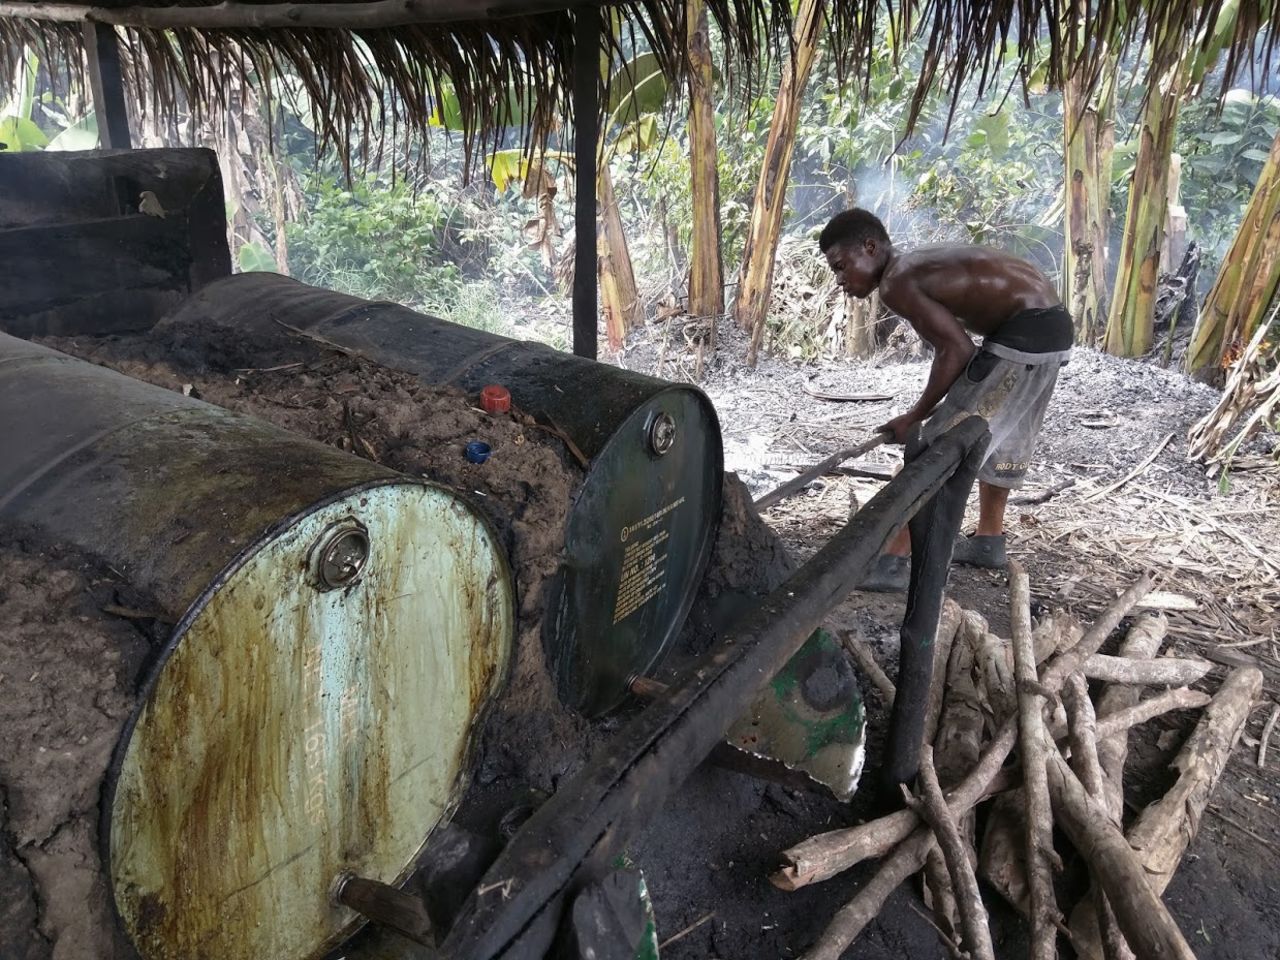 A  young man puts more wood on the fire to heat drums of fermented palm sap and evaporate the alcohol.